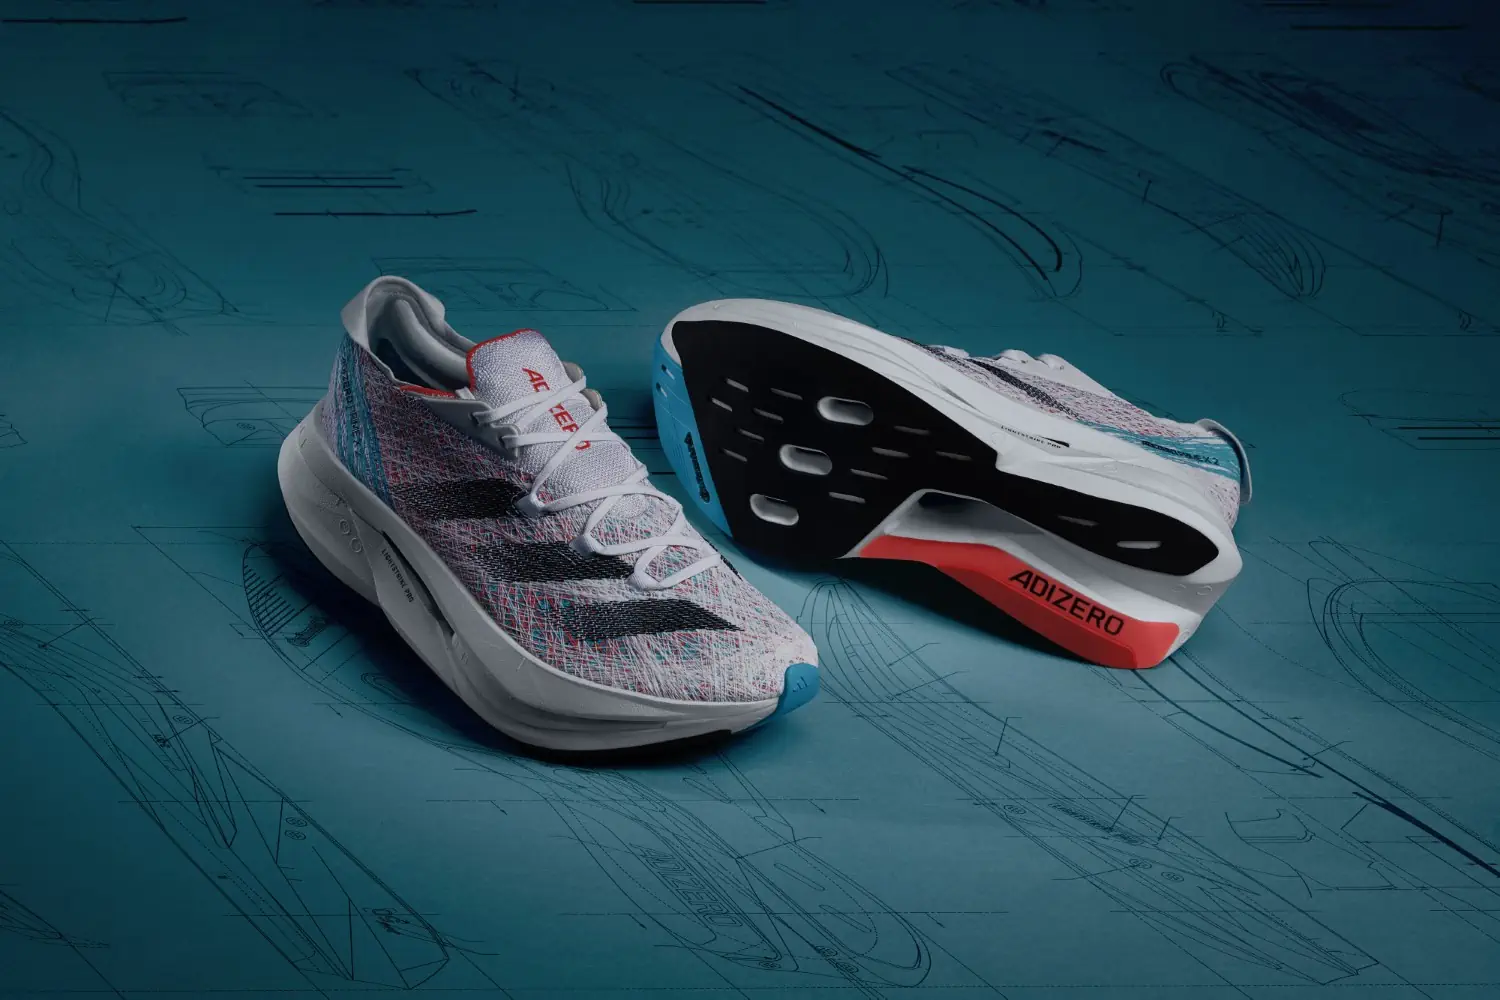 The adidas adizero Prime X 2 Strung makes a dynamic entry in footwear technology